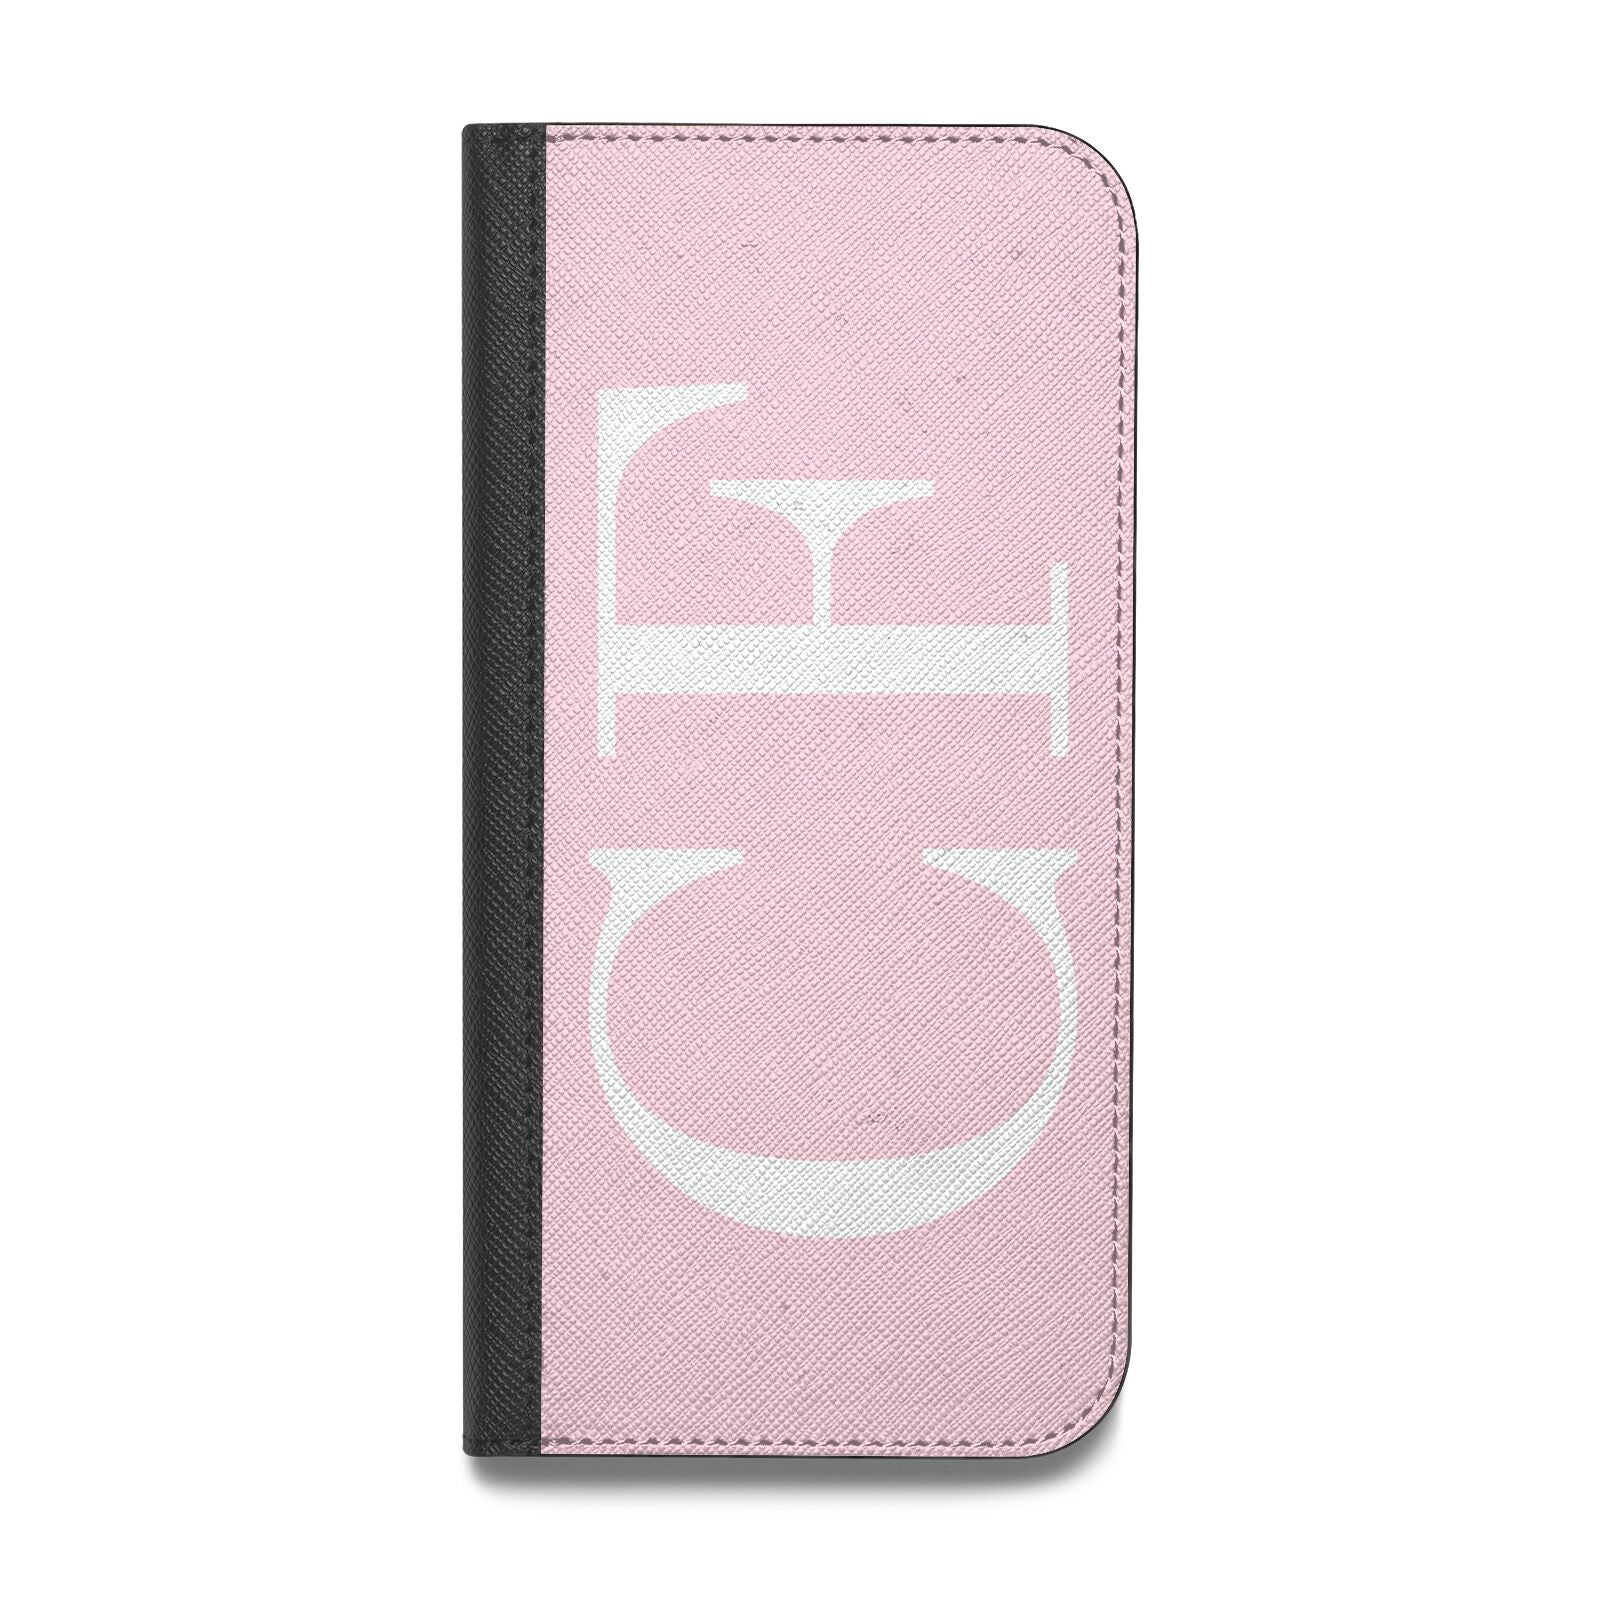 Personalised Pink White Side Initials Vegan Leather Flip Samsung Case